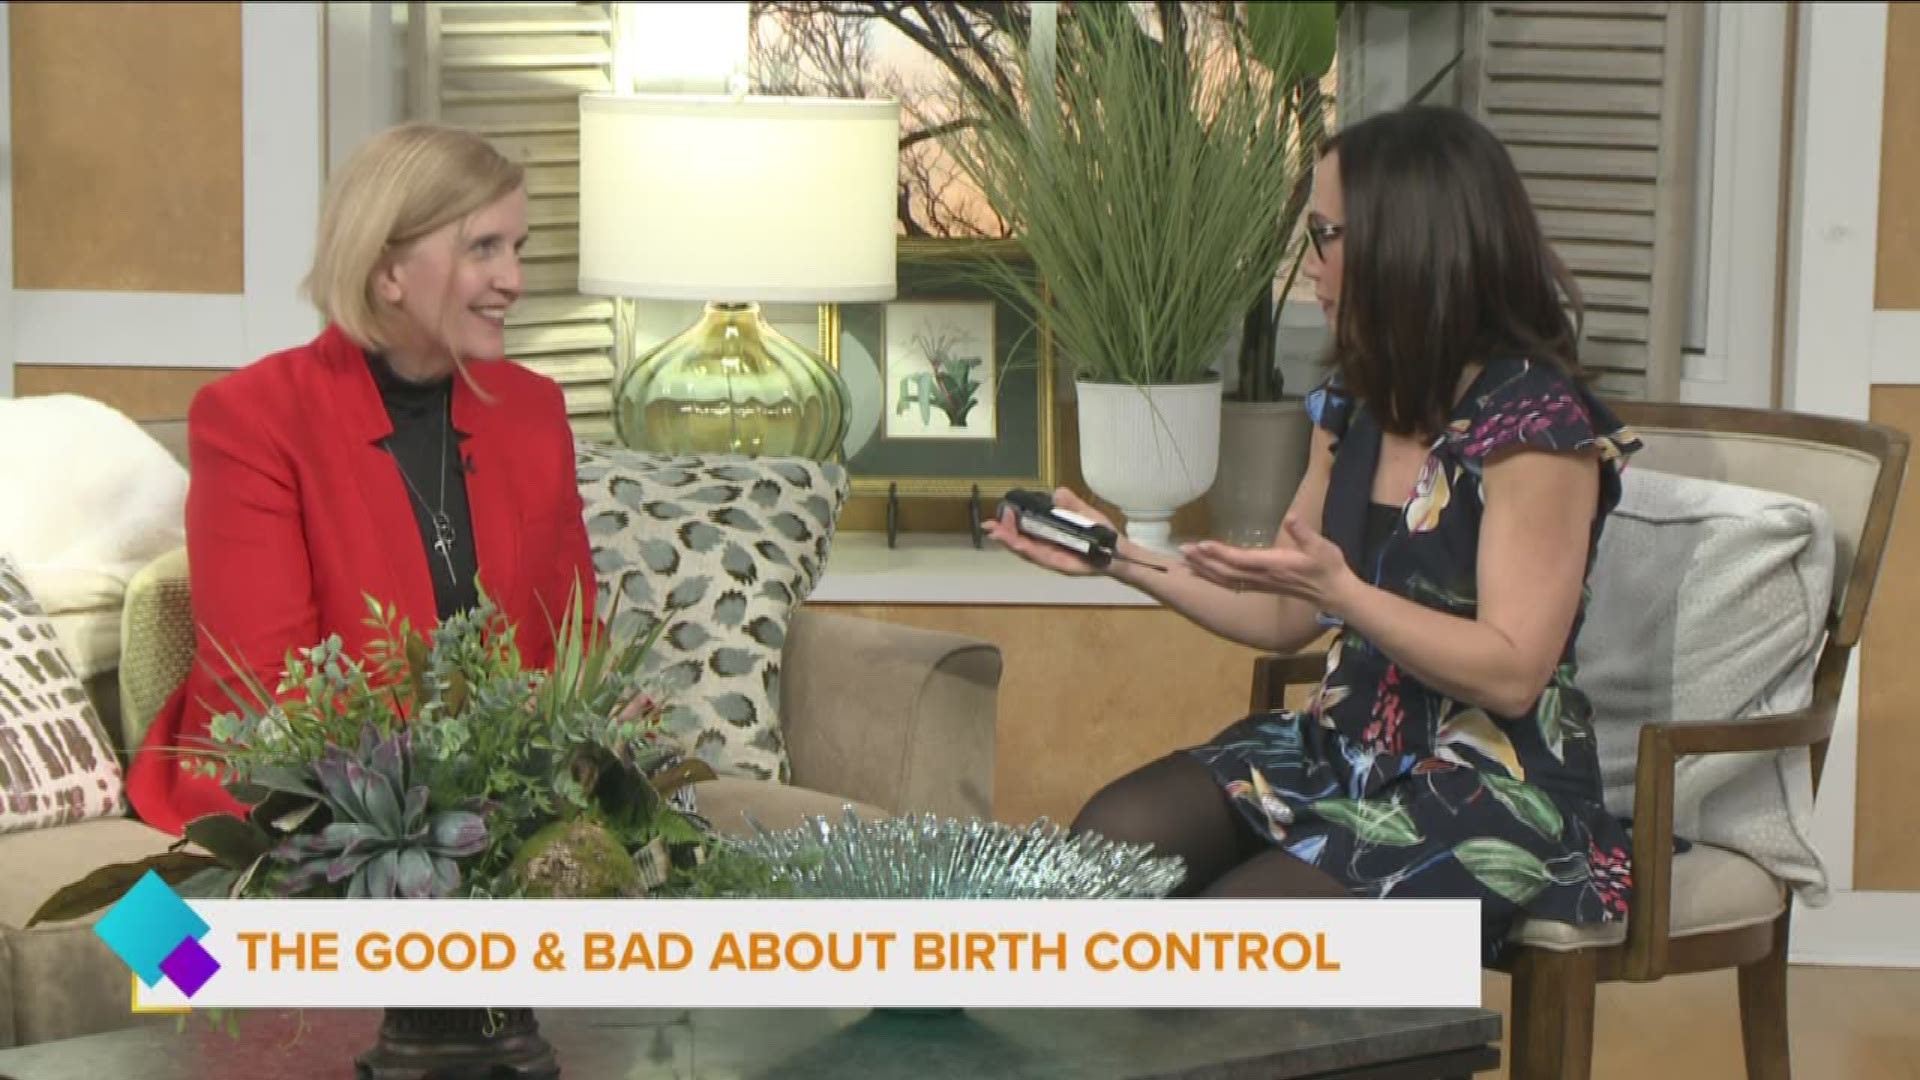 Dr. Alyse Kelly-Jones discusses how birth control impacts women’s bodies.